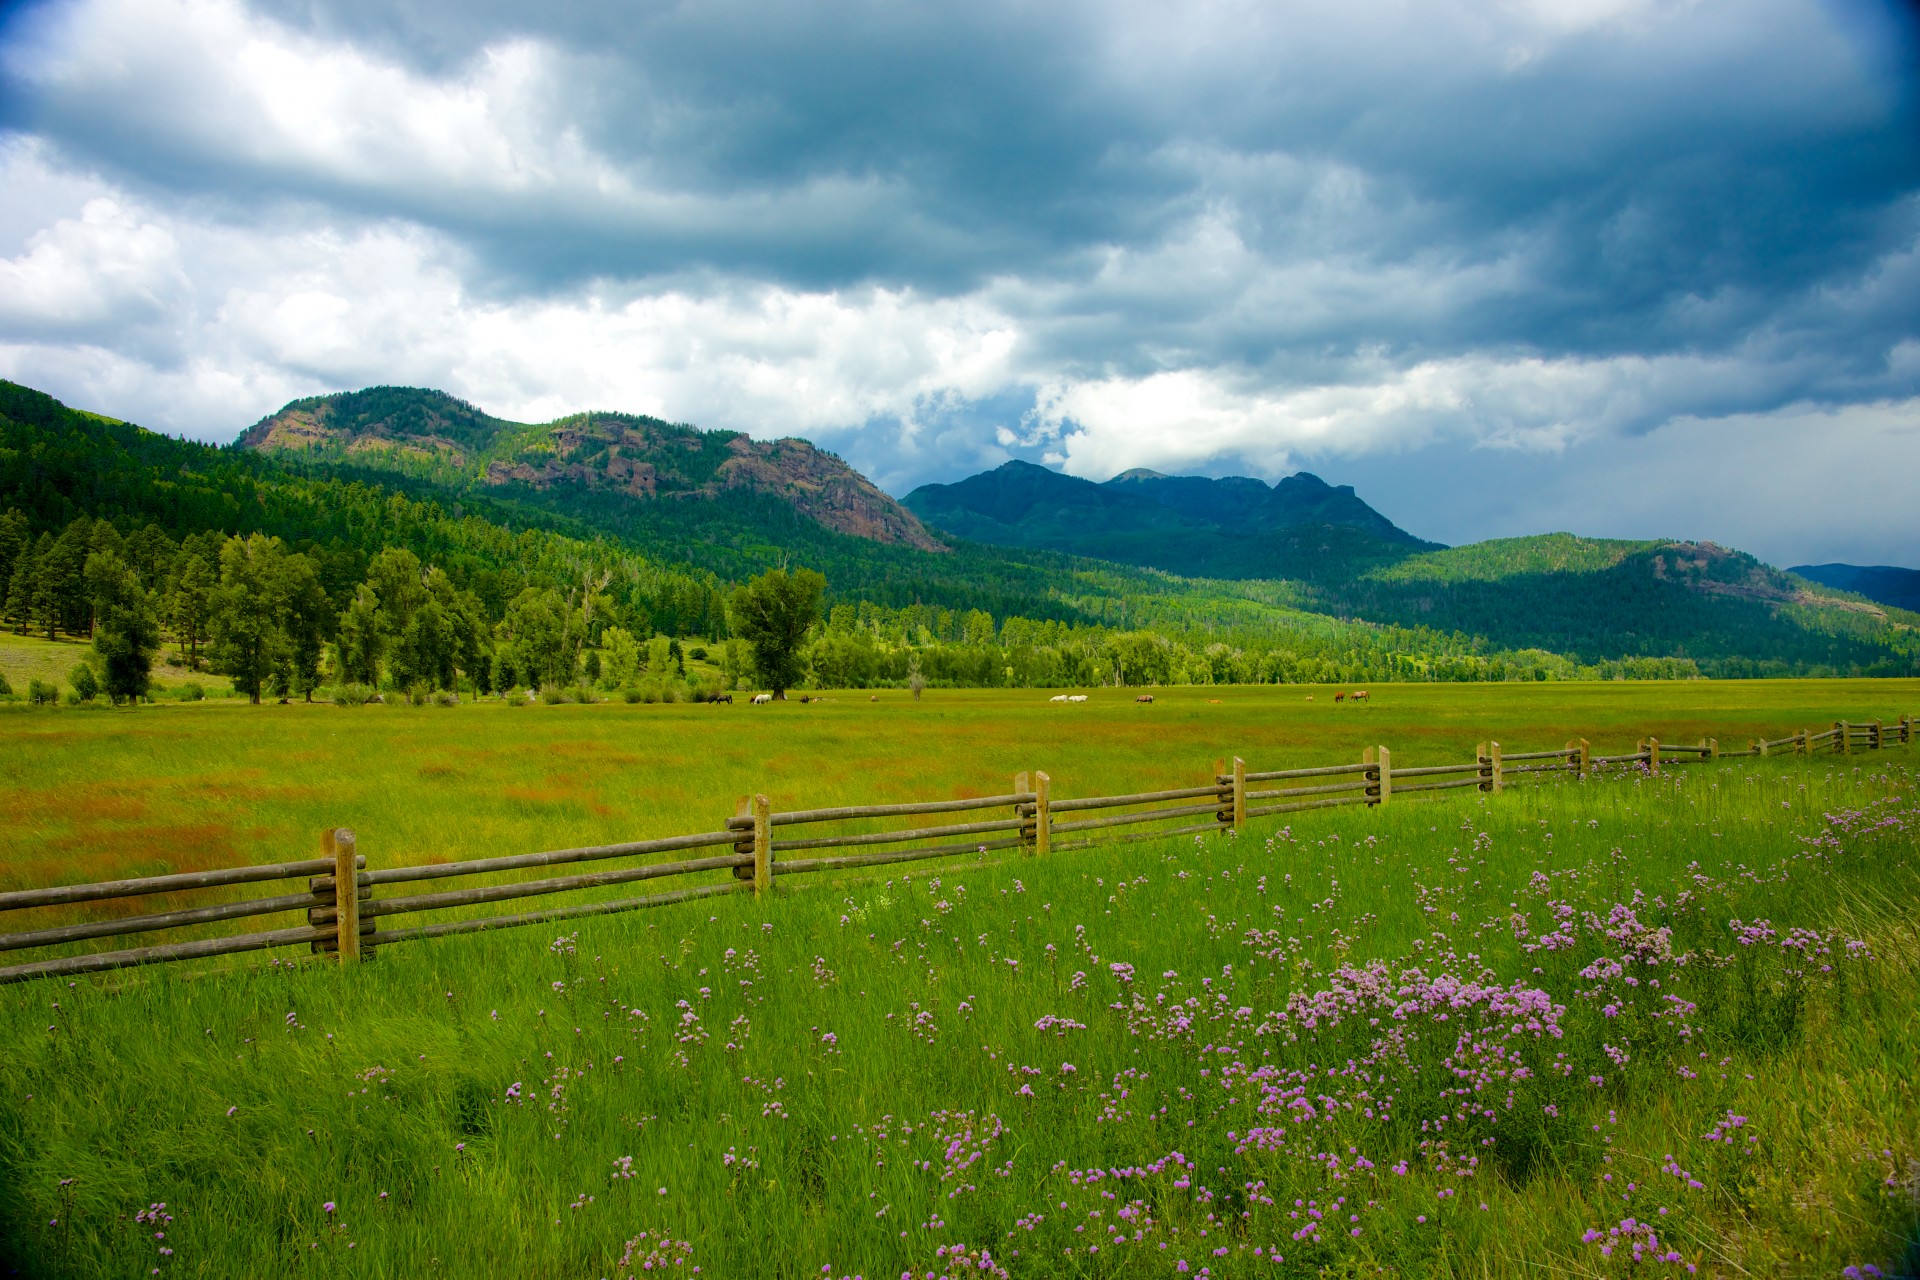 Wooden Fence Ranchland